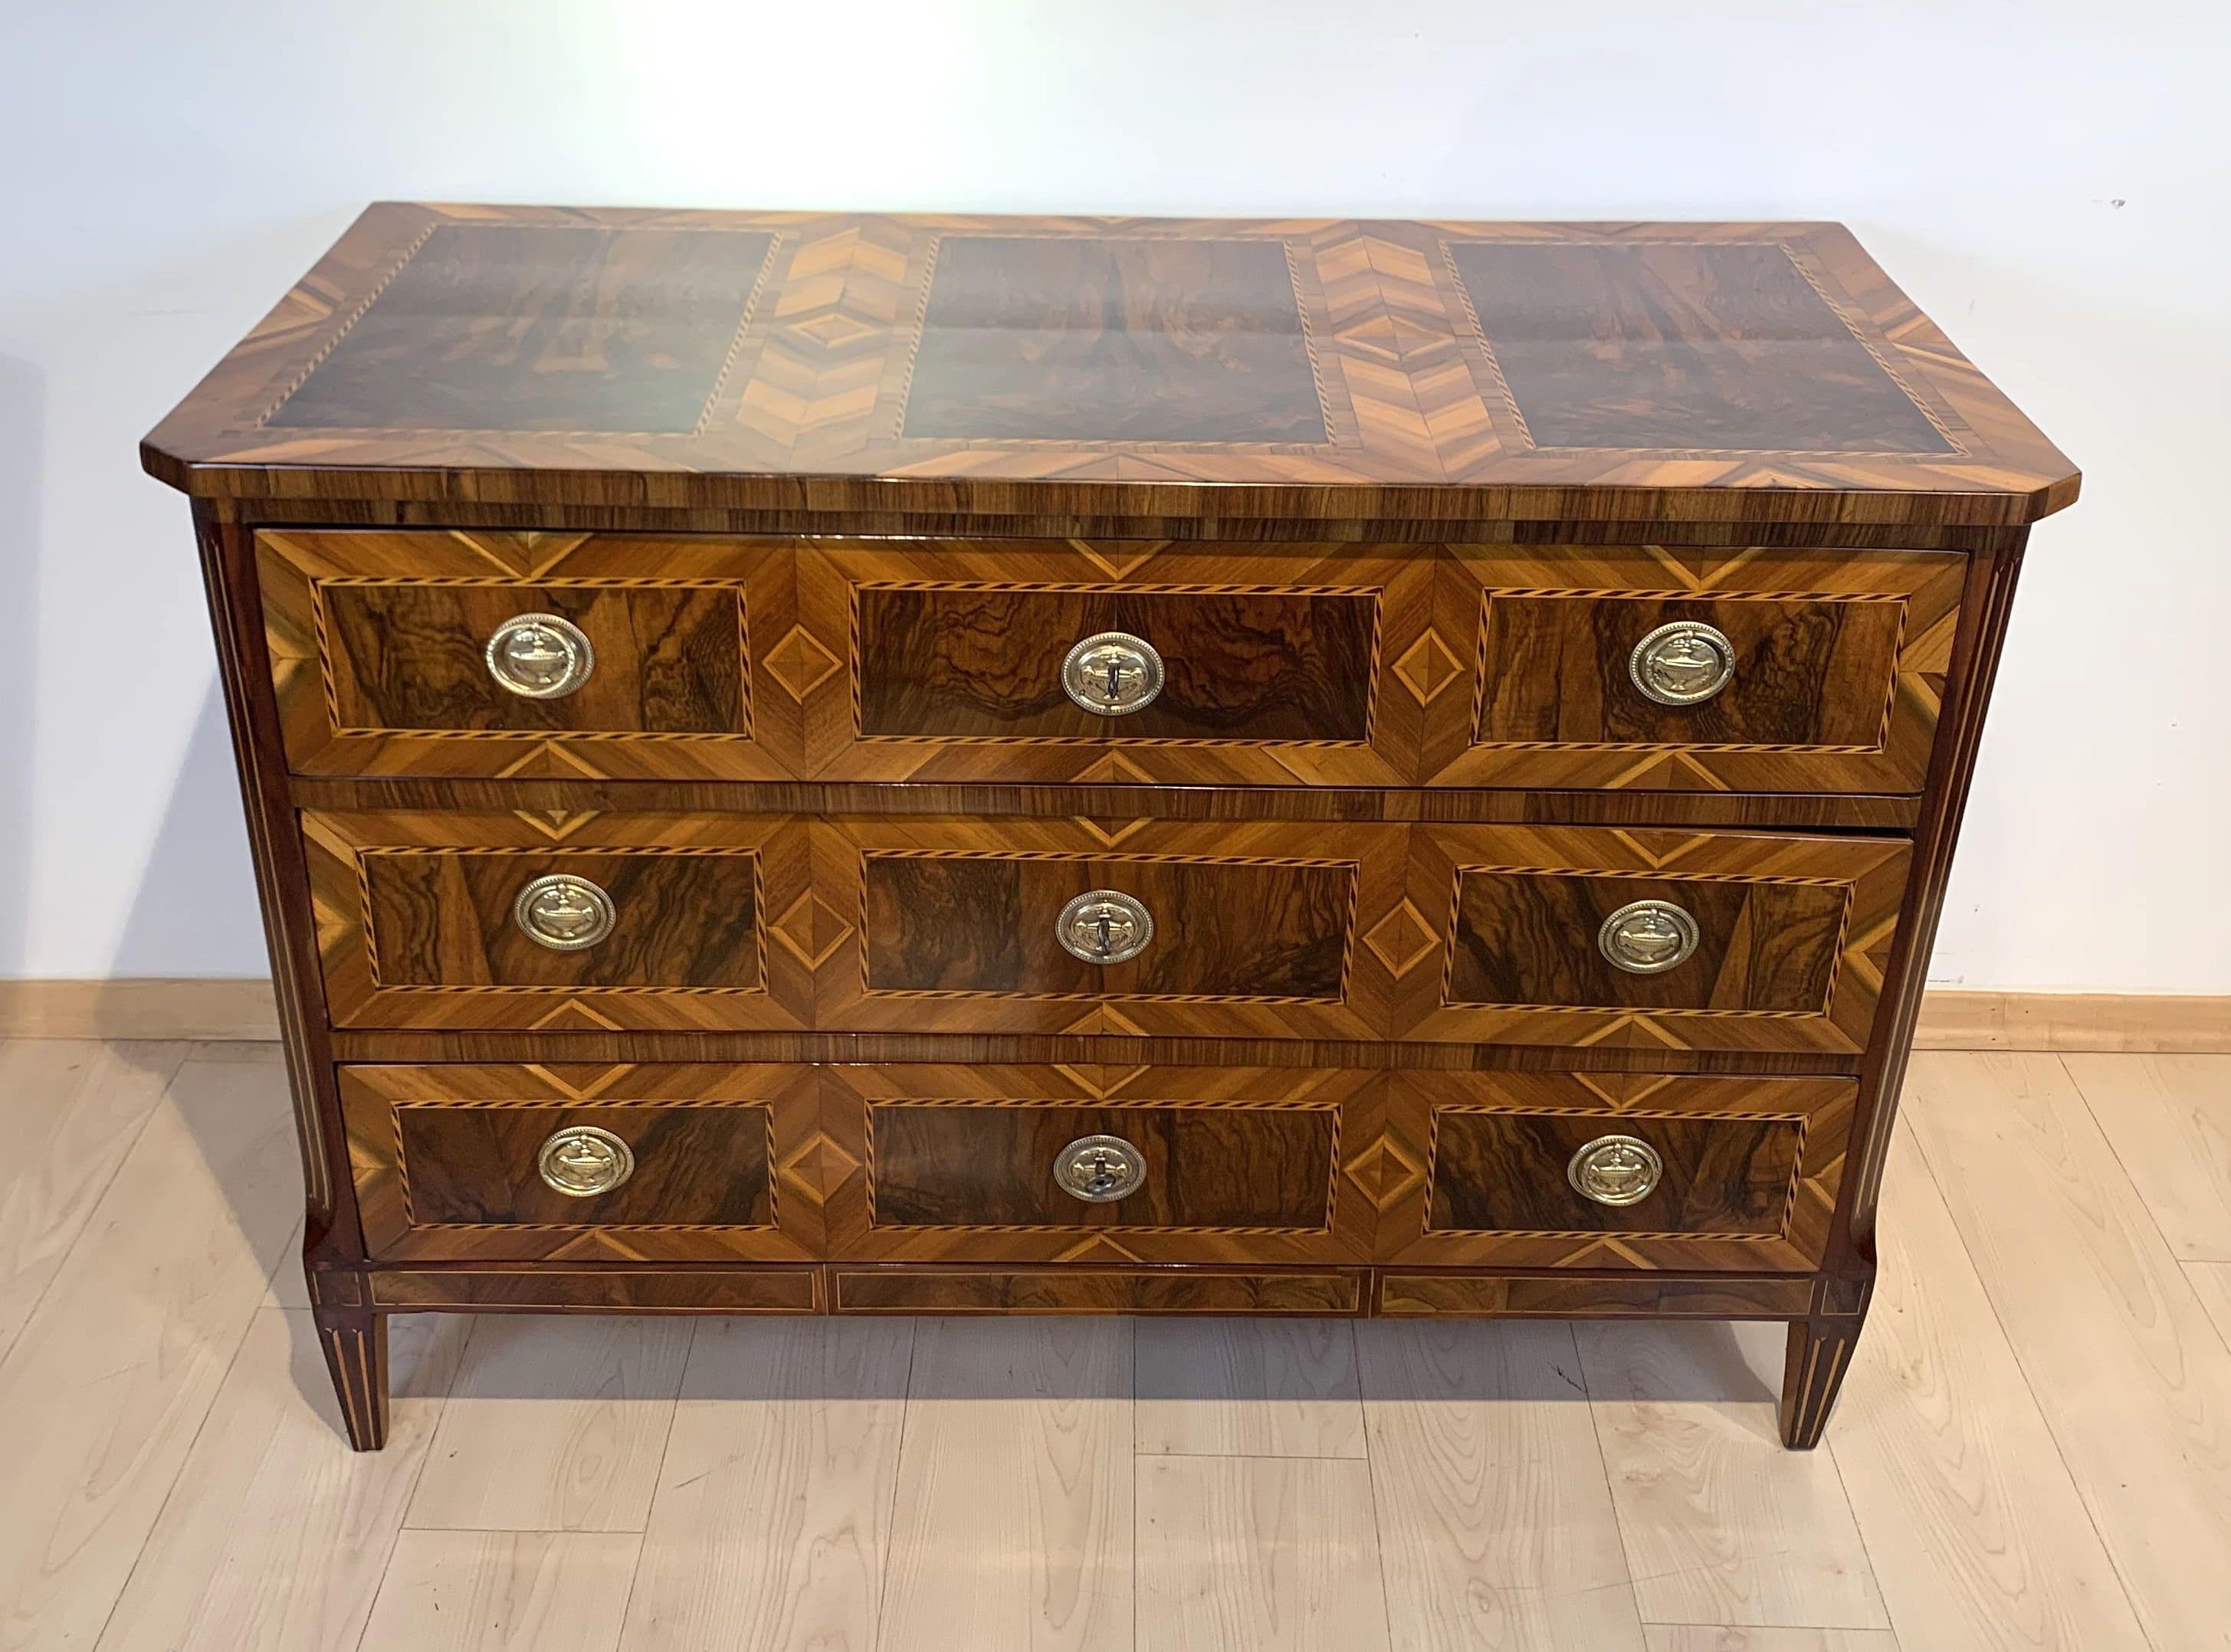 Beautiful and very elegant original, greatly restored Louis XVI. / Louis seize commode / chest of three drawers from Munich, South Germany circa 1790.

Perfect walnut veneered on pine with inlays in maple, plum and ebony. Three drawers with big